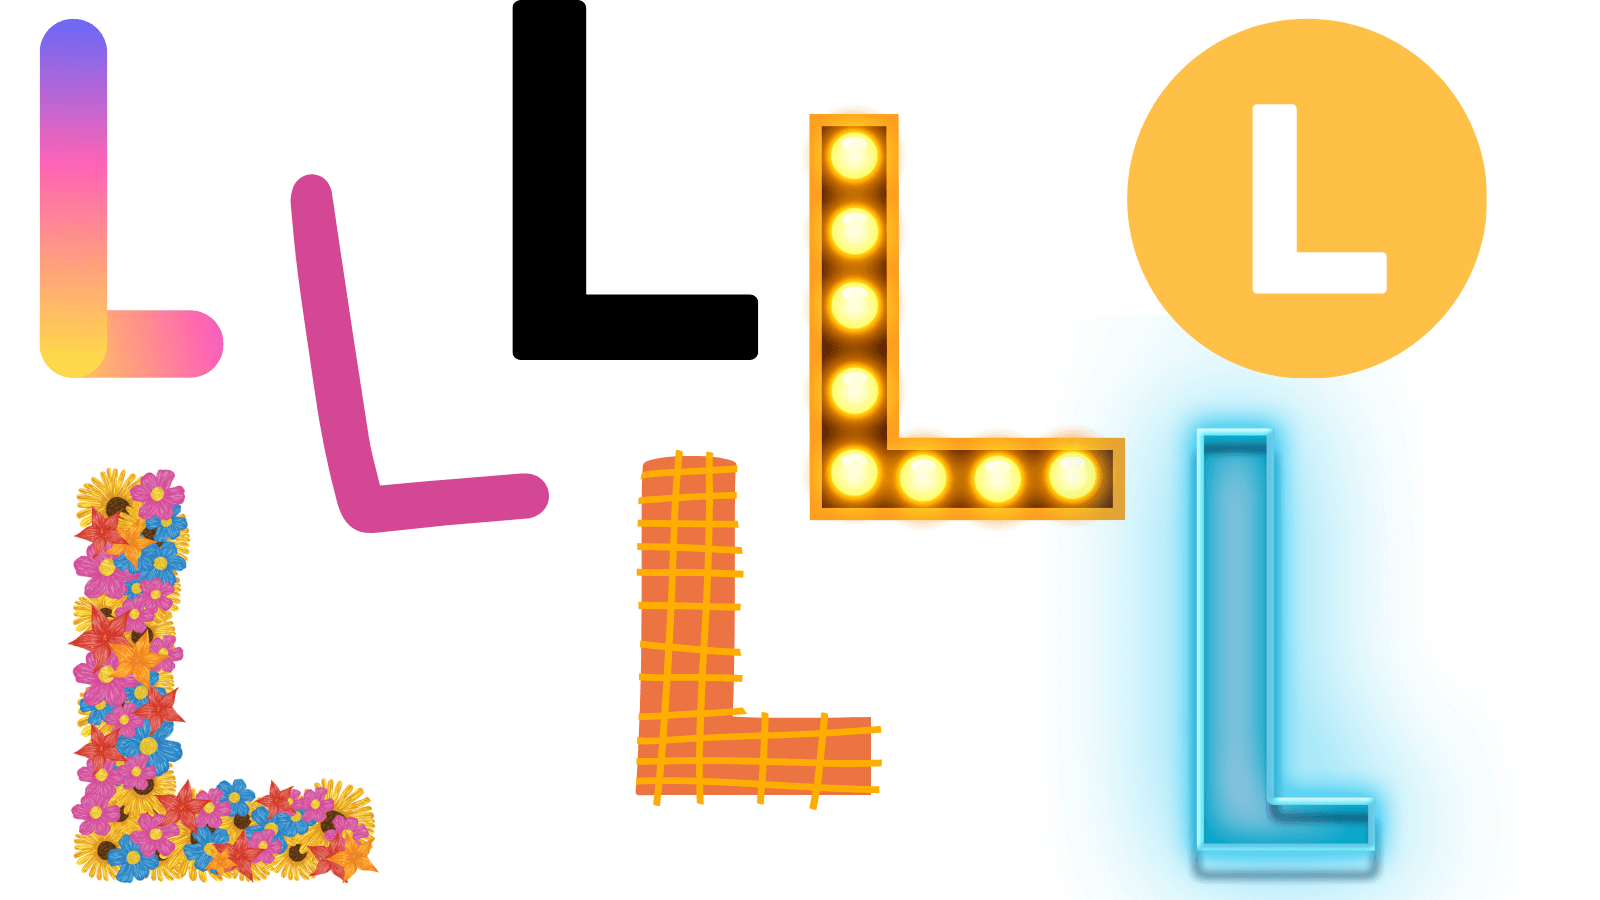 Several different stylized letter Ls